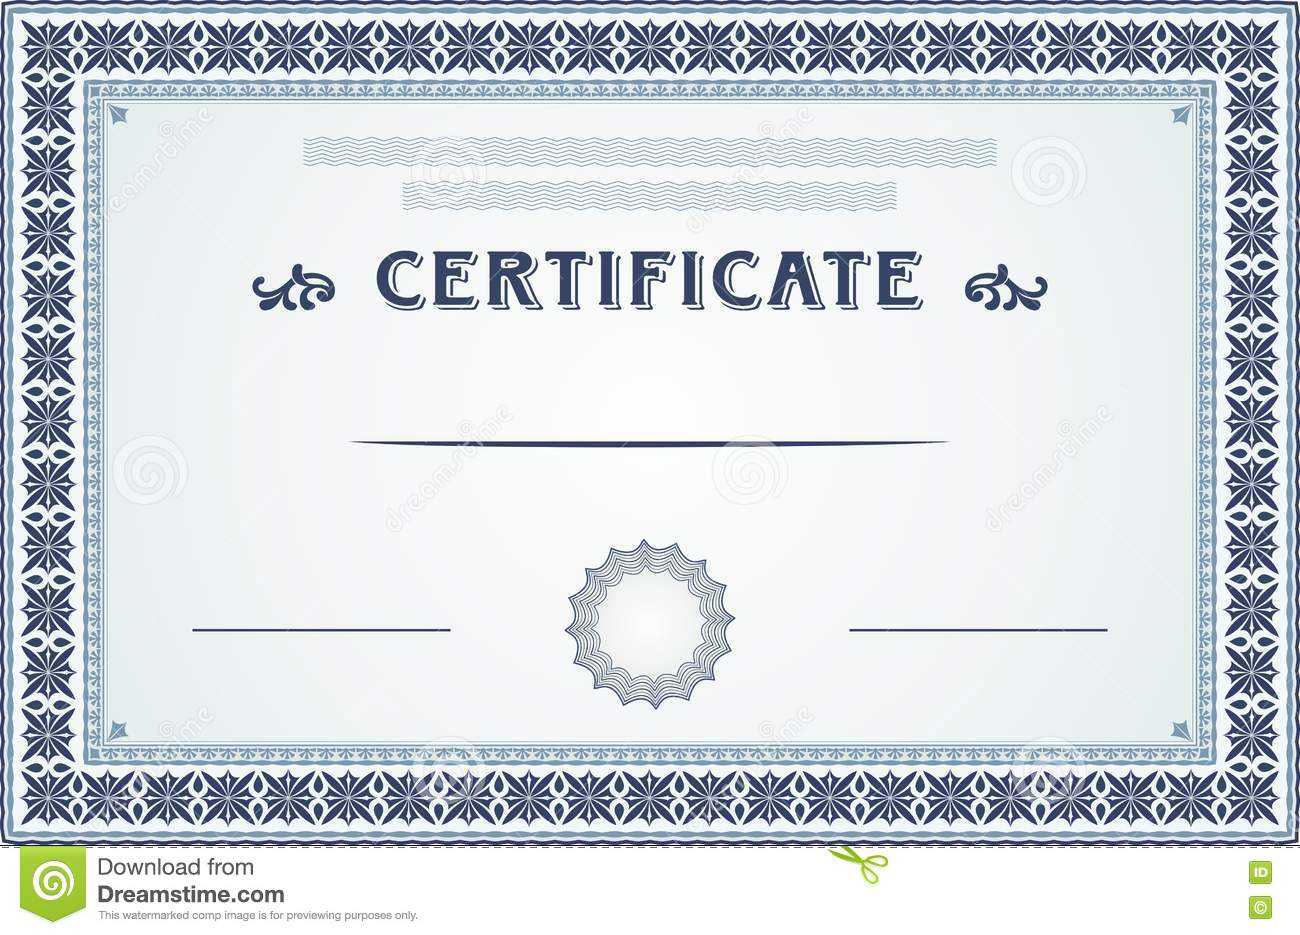 Certificate Border And Template Design Stock Vector In Certificate Border Design Templates